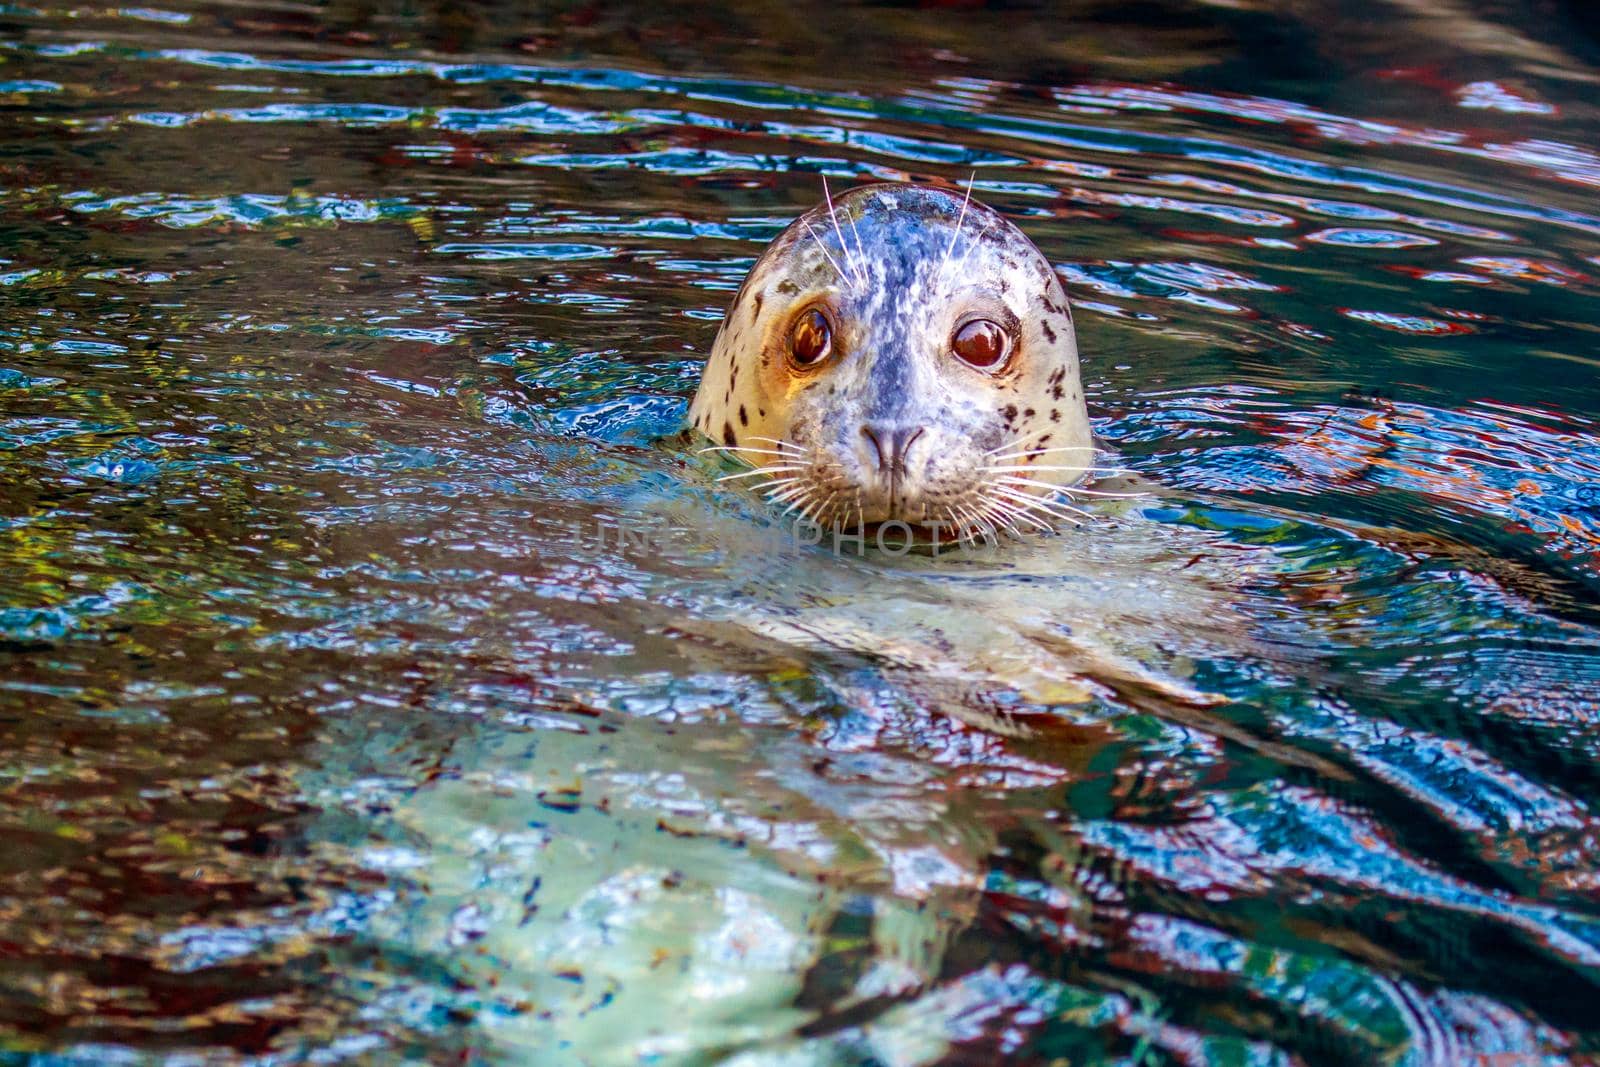 Harbor seal with spotted coat and large, round, soulful-looking eyes.